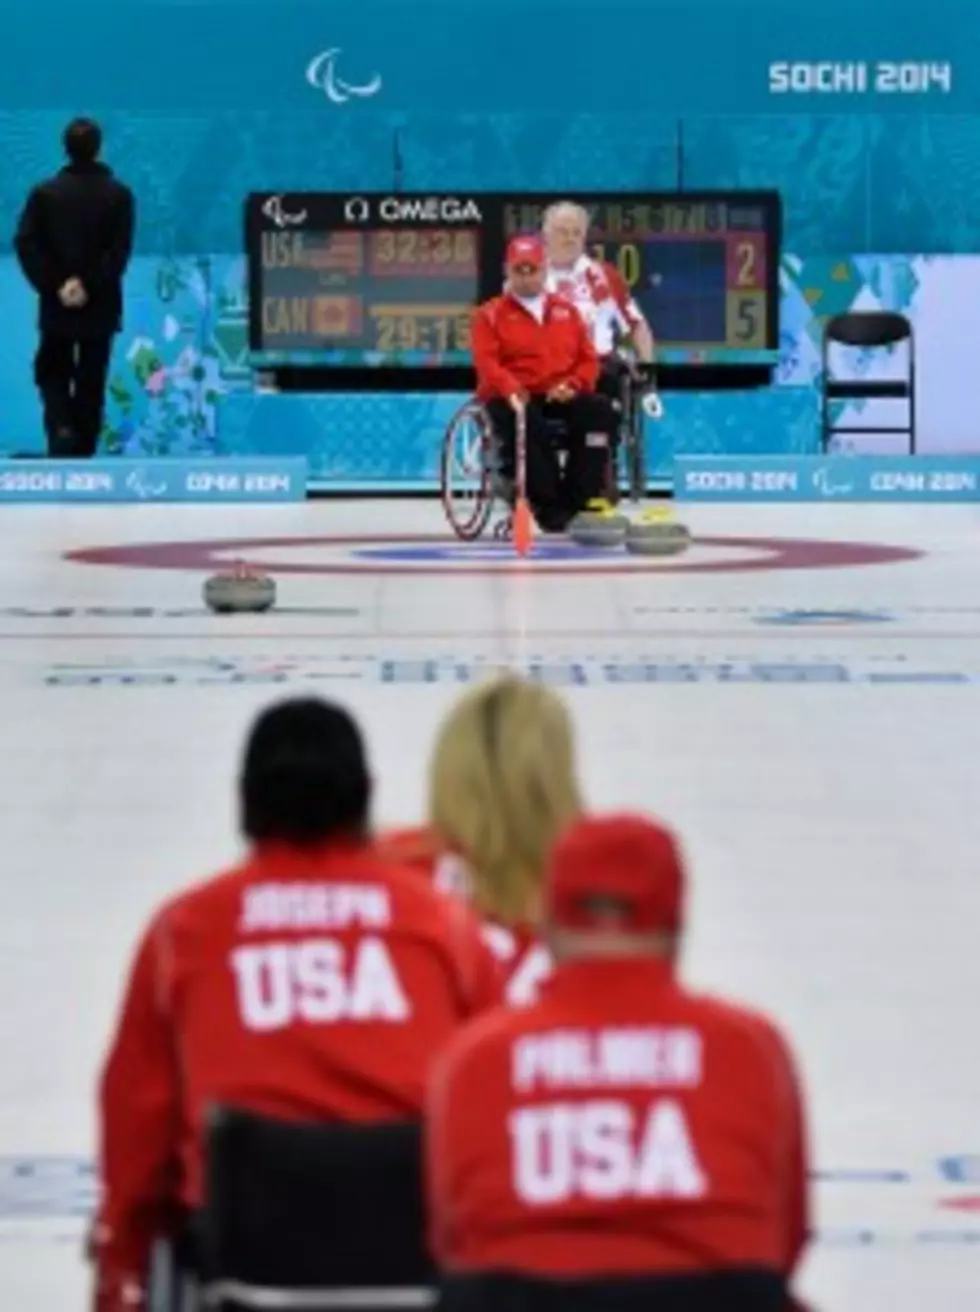 US Chances At Paralympic Curling Medal Fade On Day 3